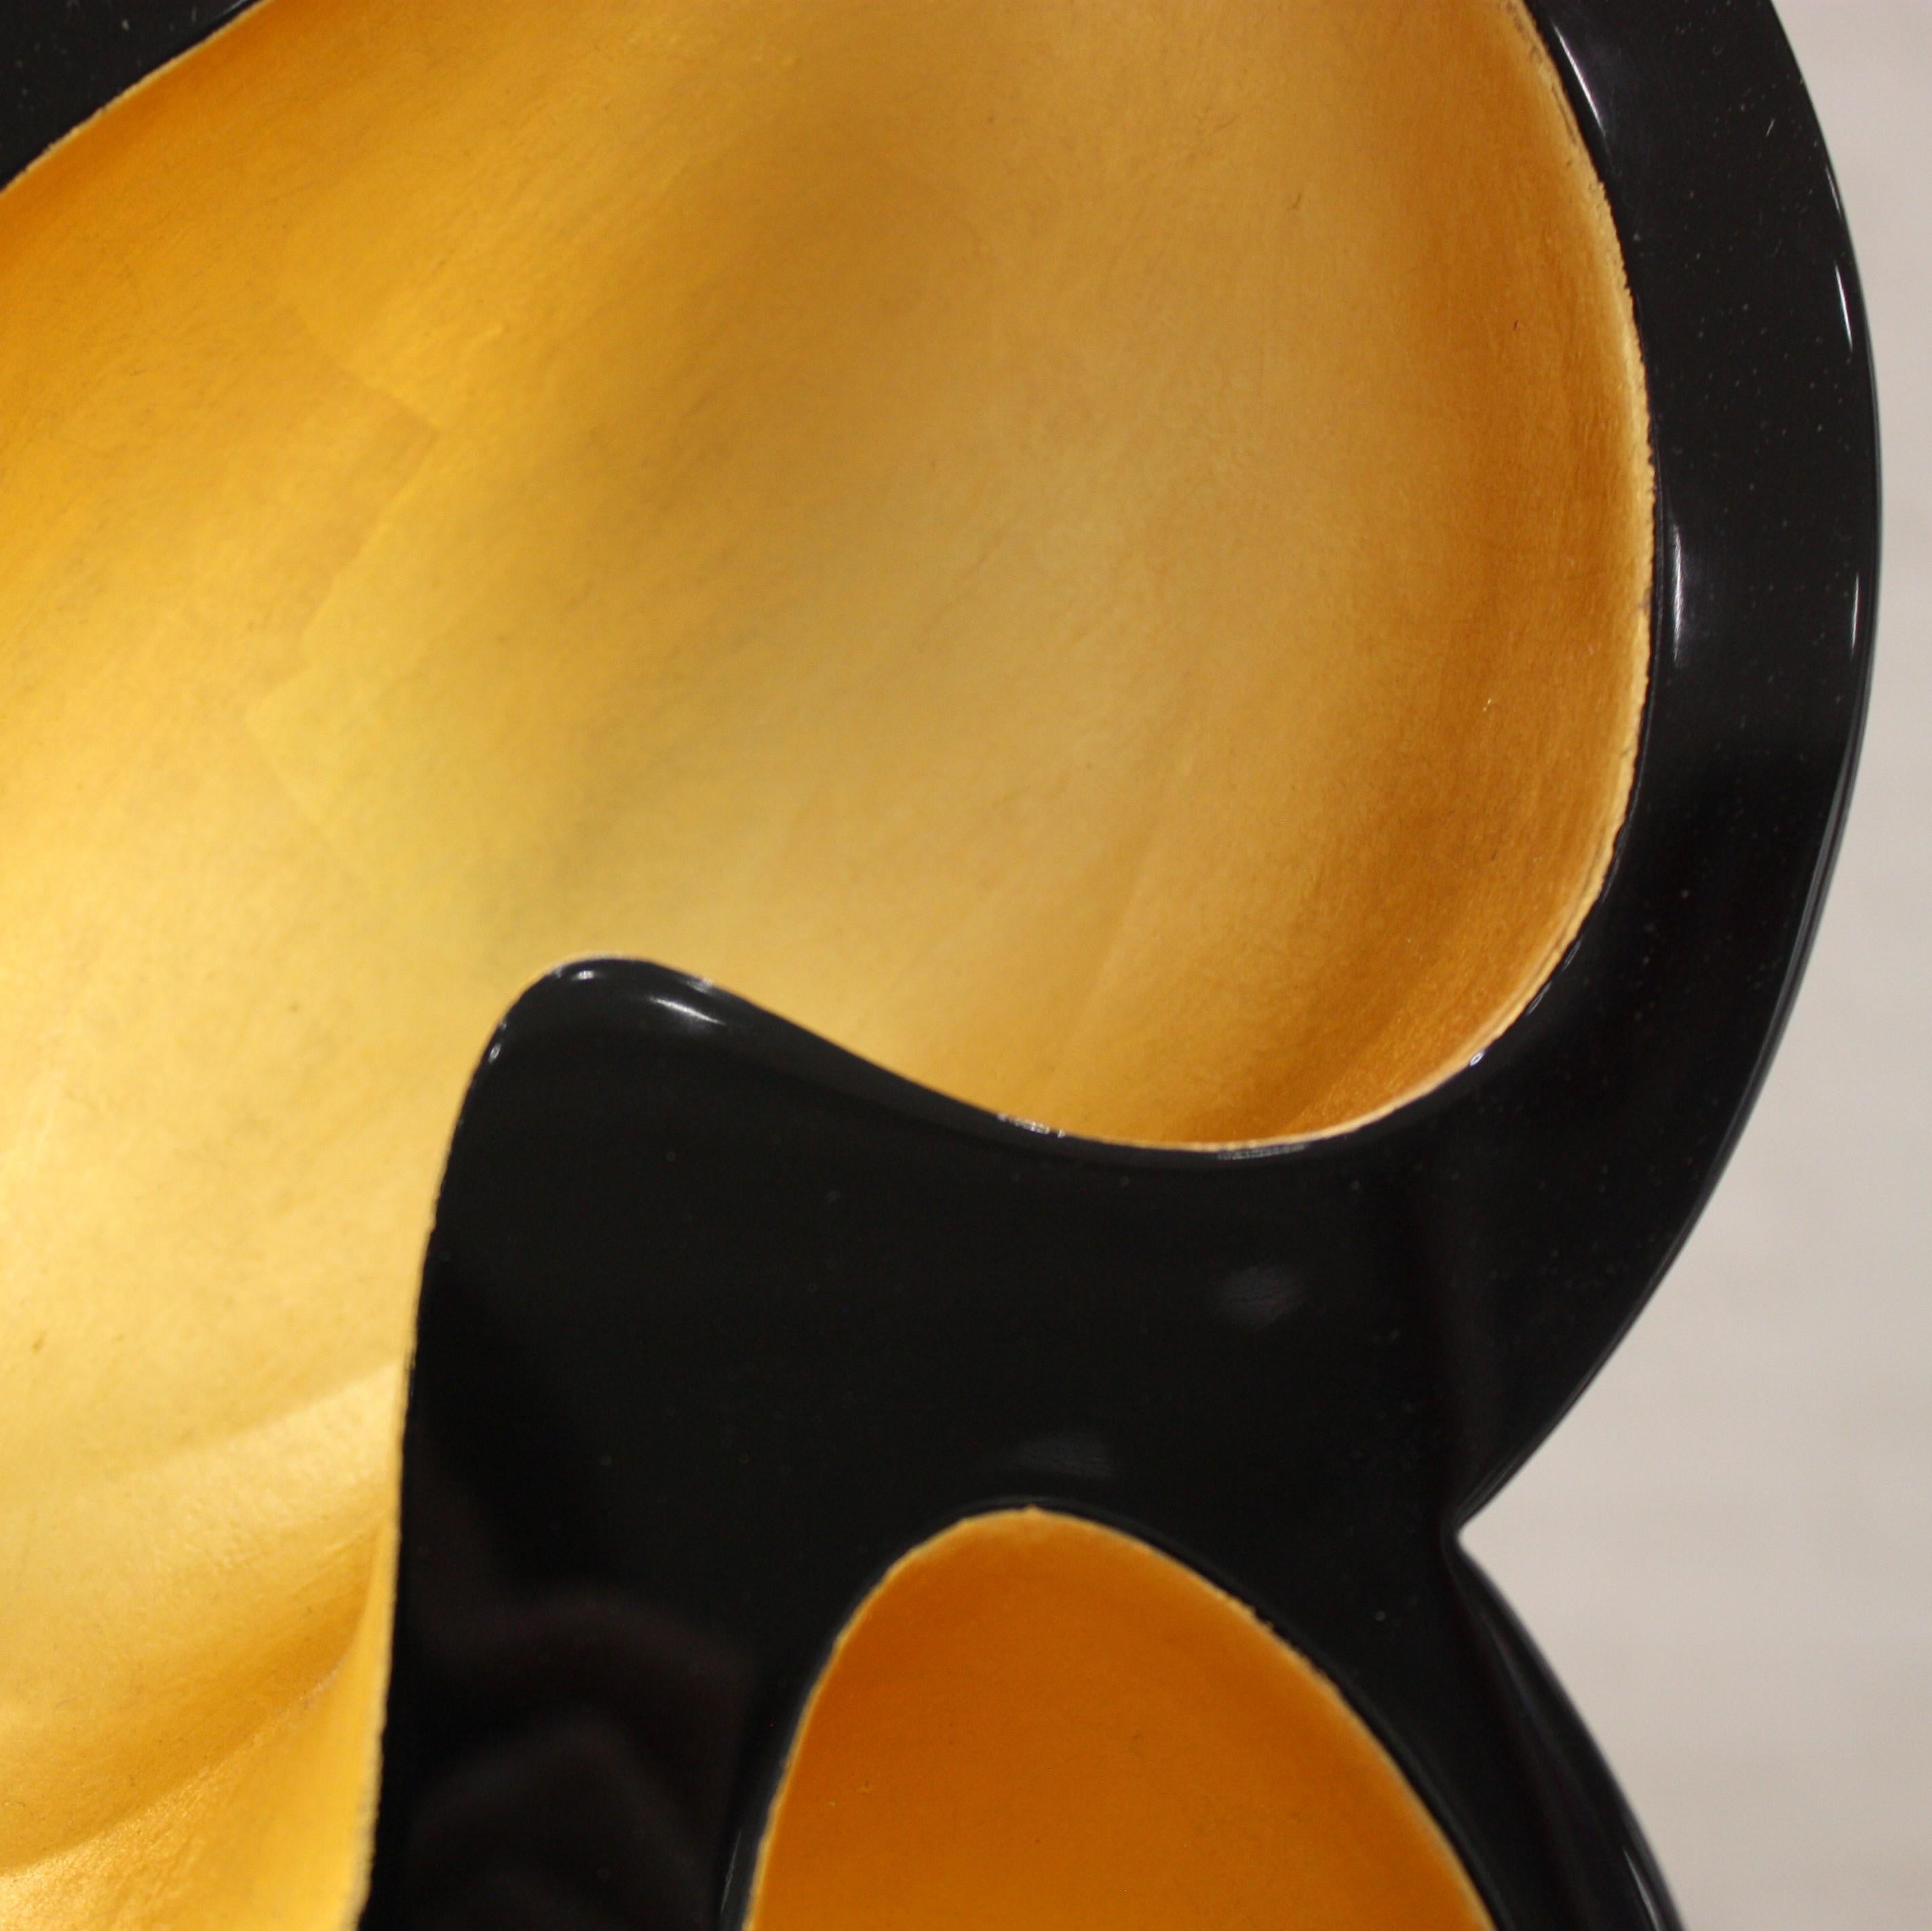 Laquered Wood and Gold Shell Sculpture, Turitella 01 2